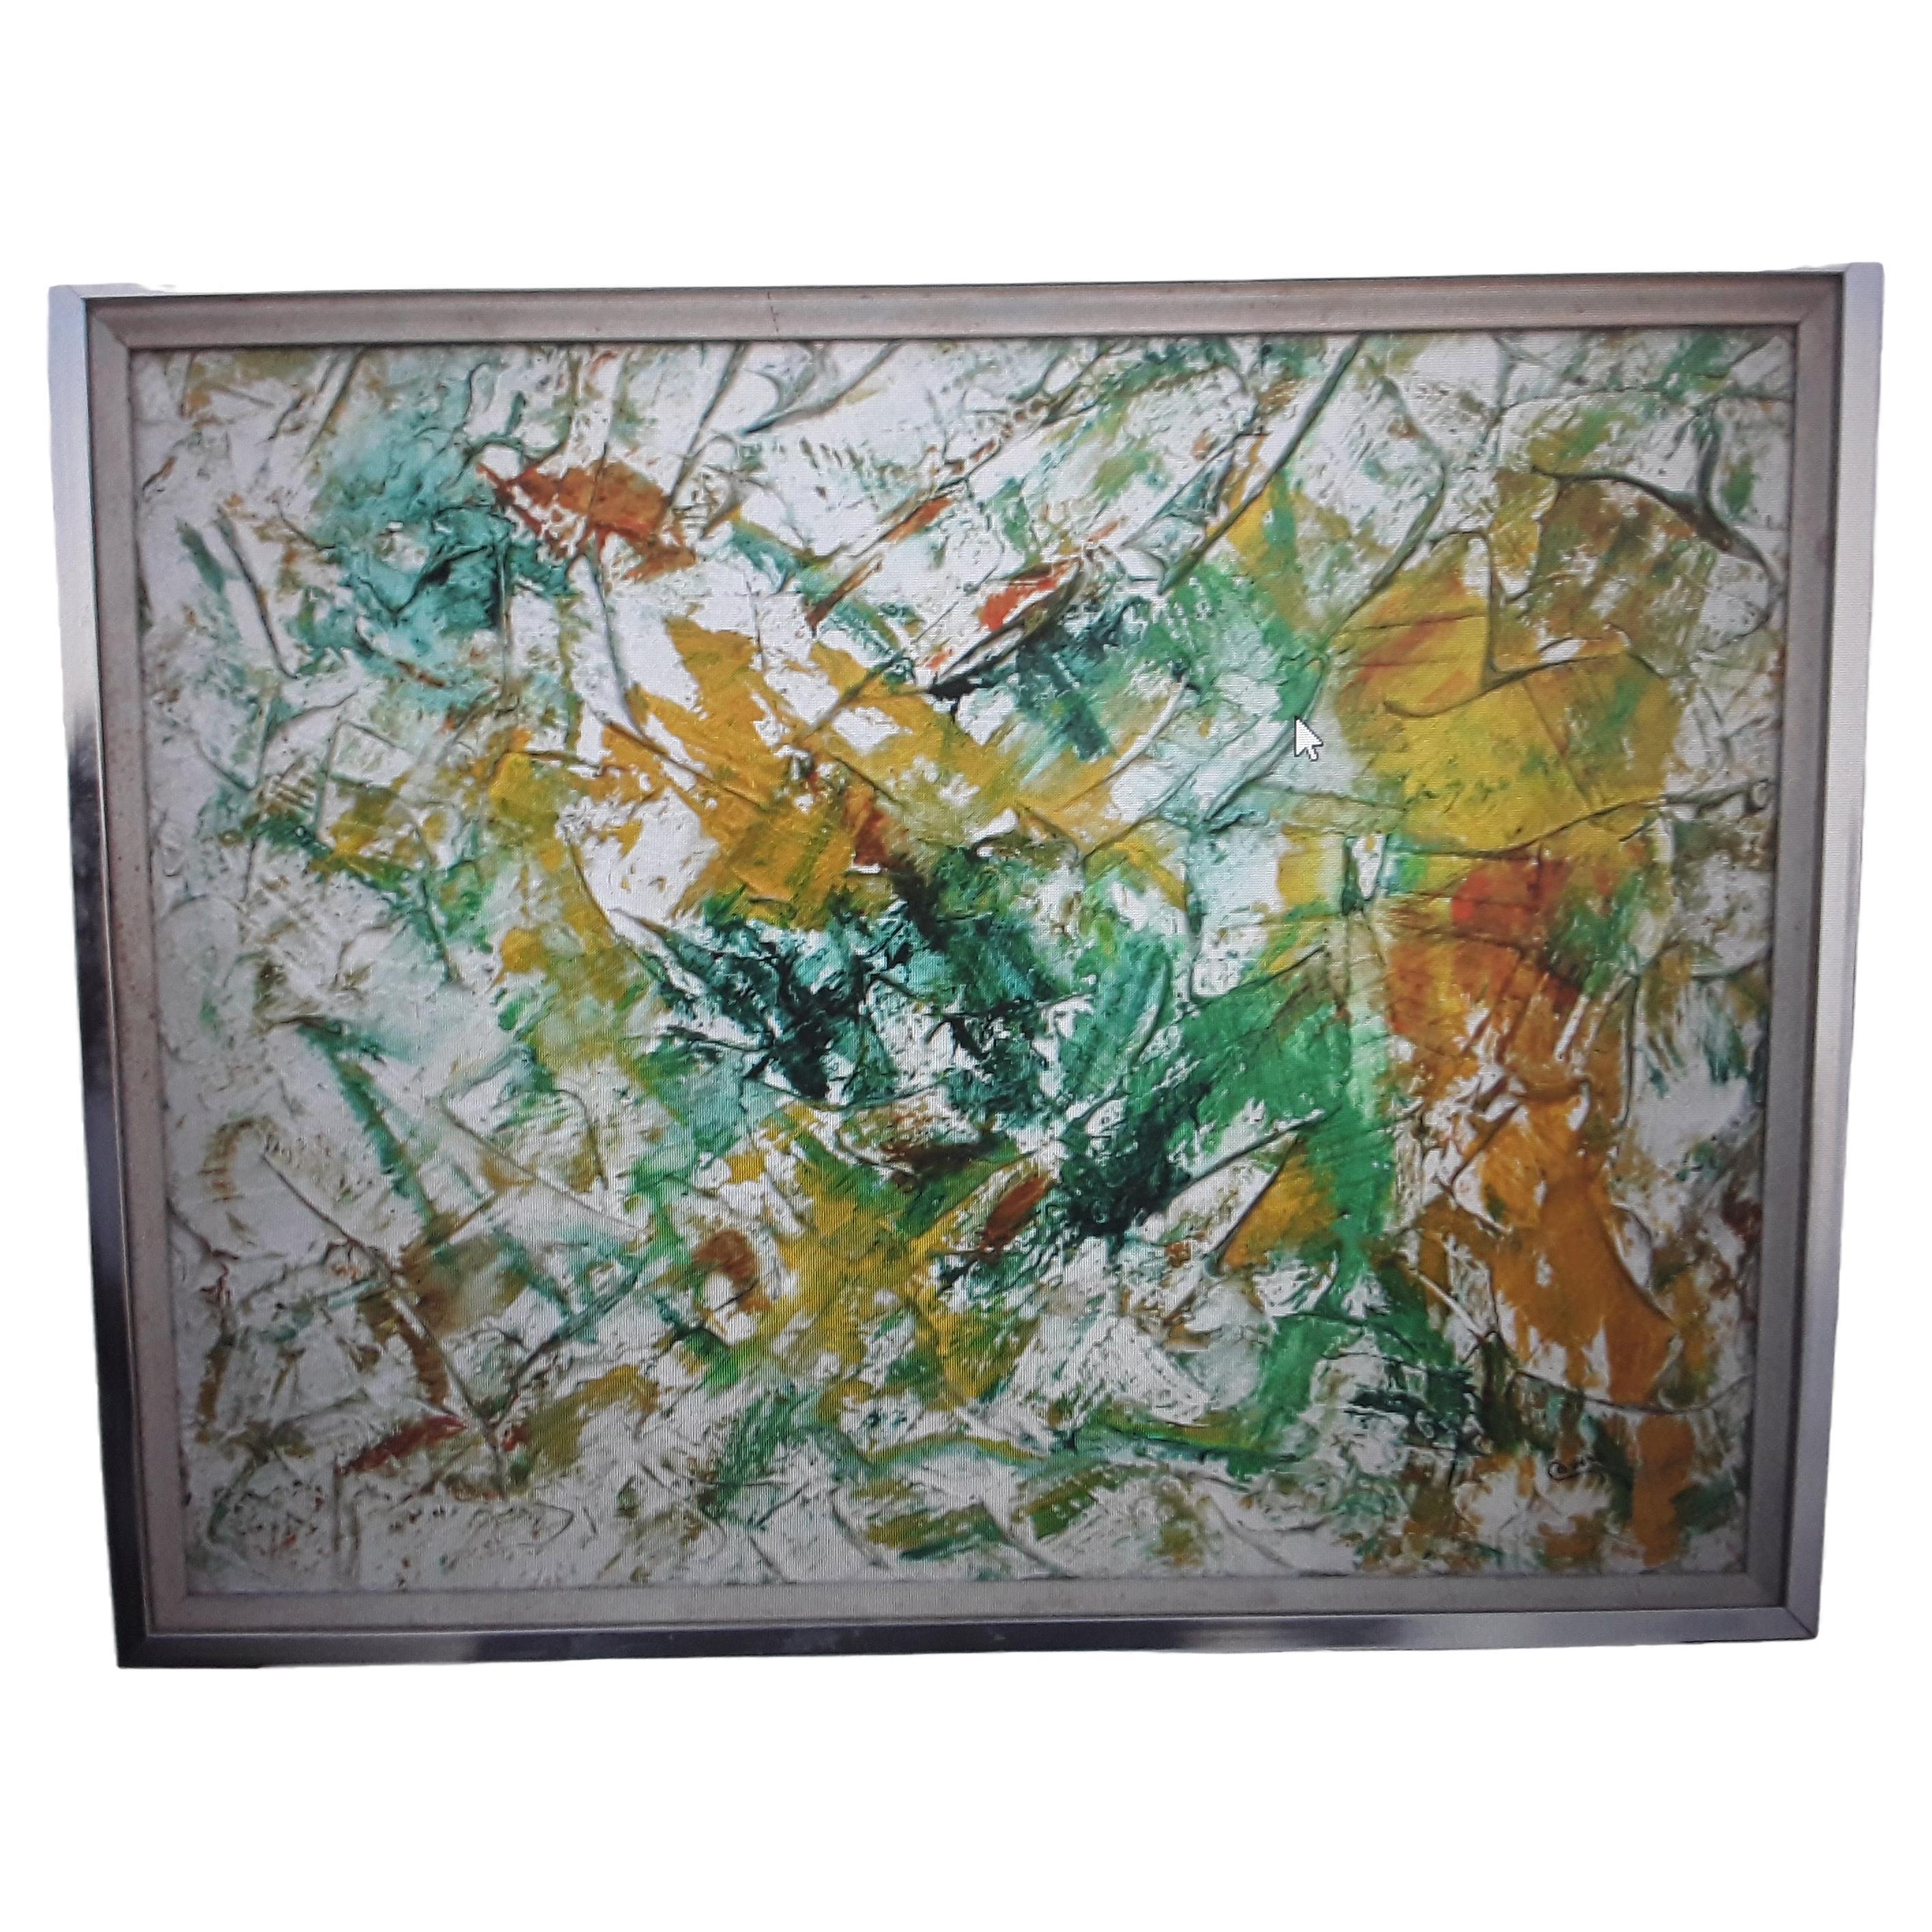 1970's Modern Multi Colored Abstract Oil Painting Framed and Signed "Cowan" For Sale